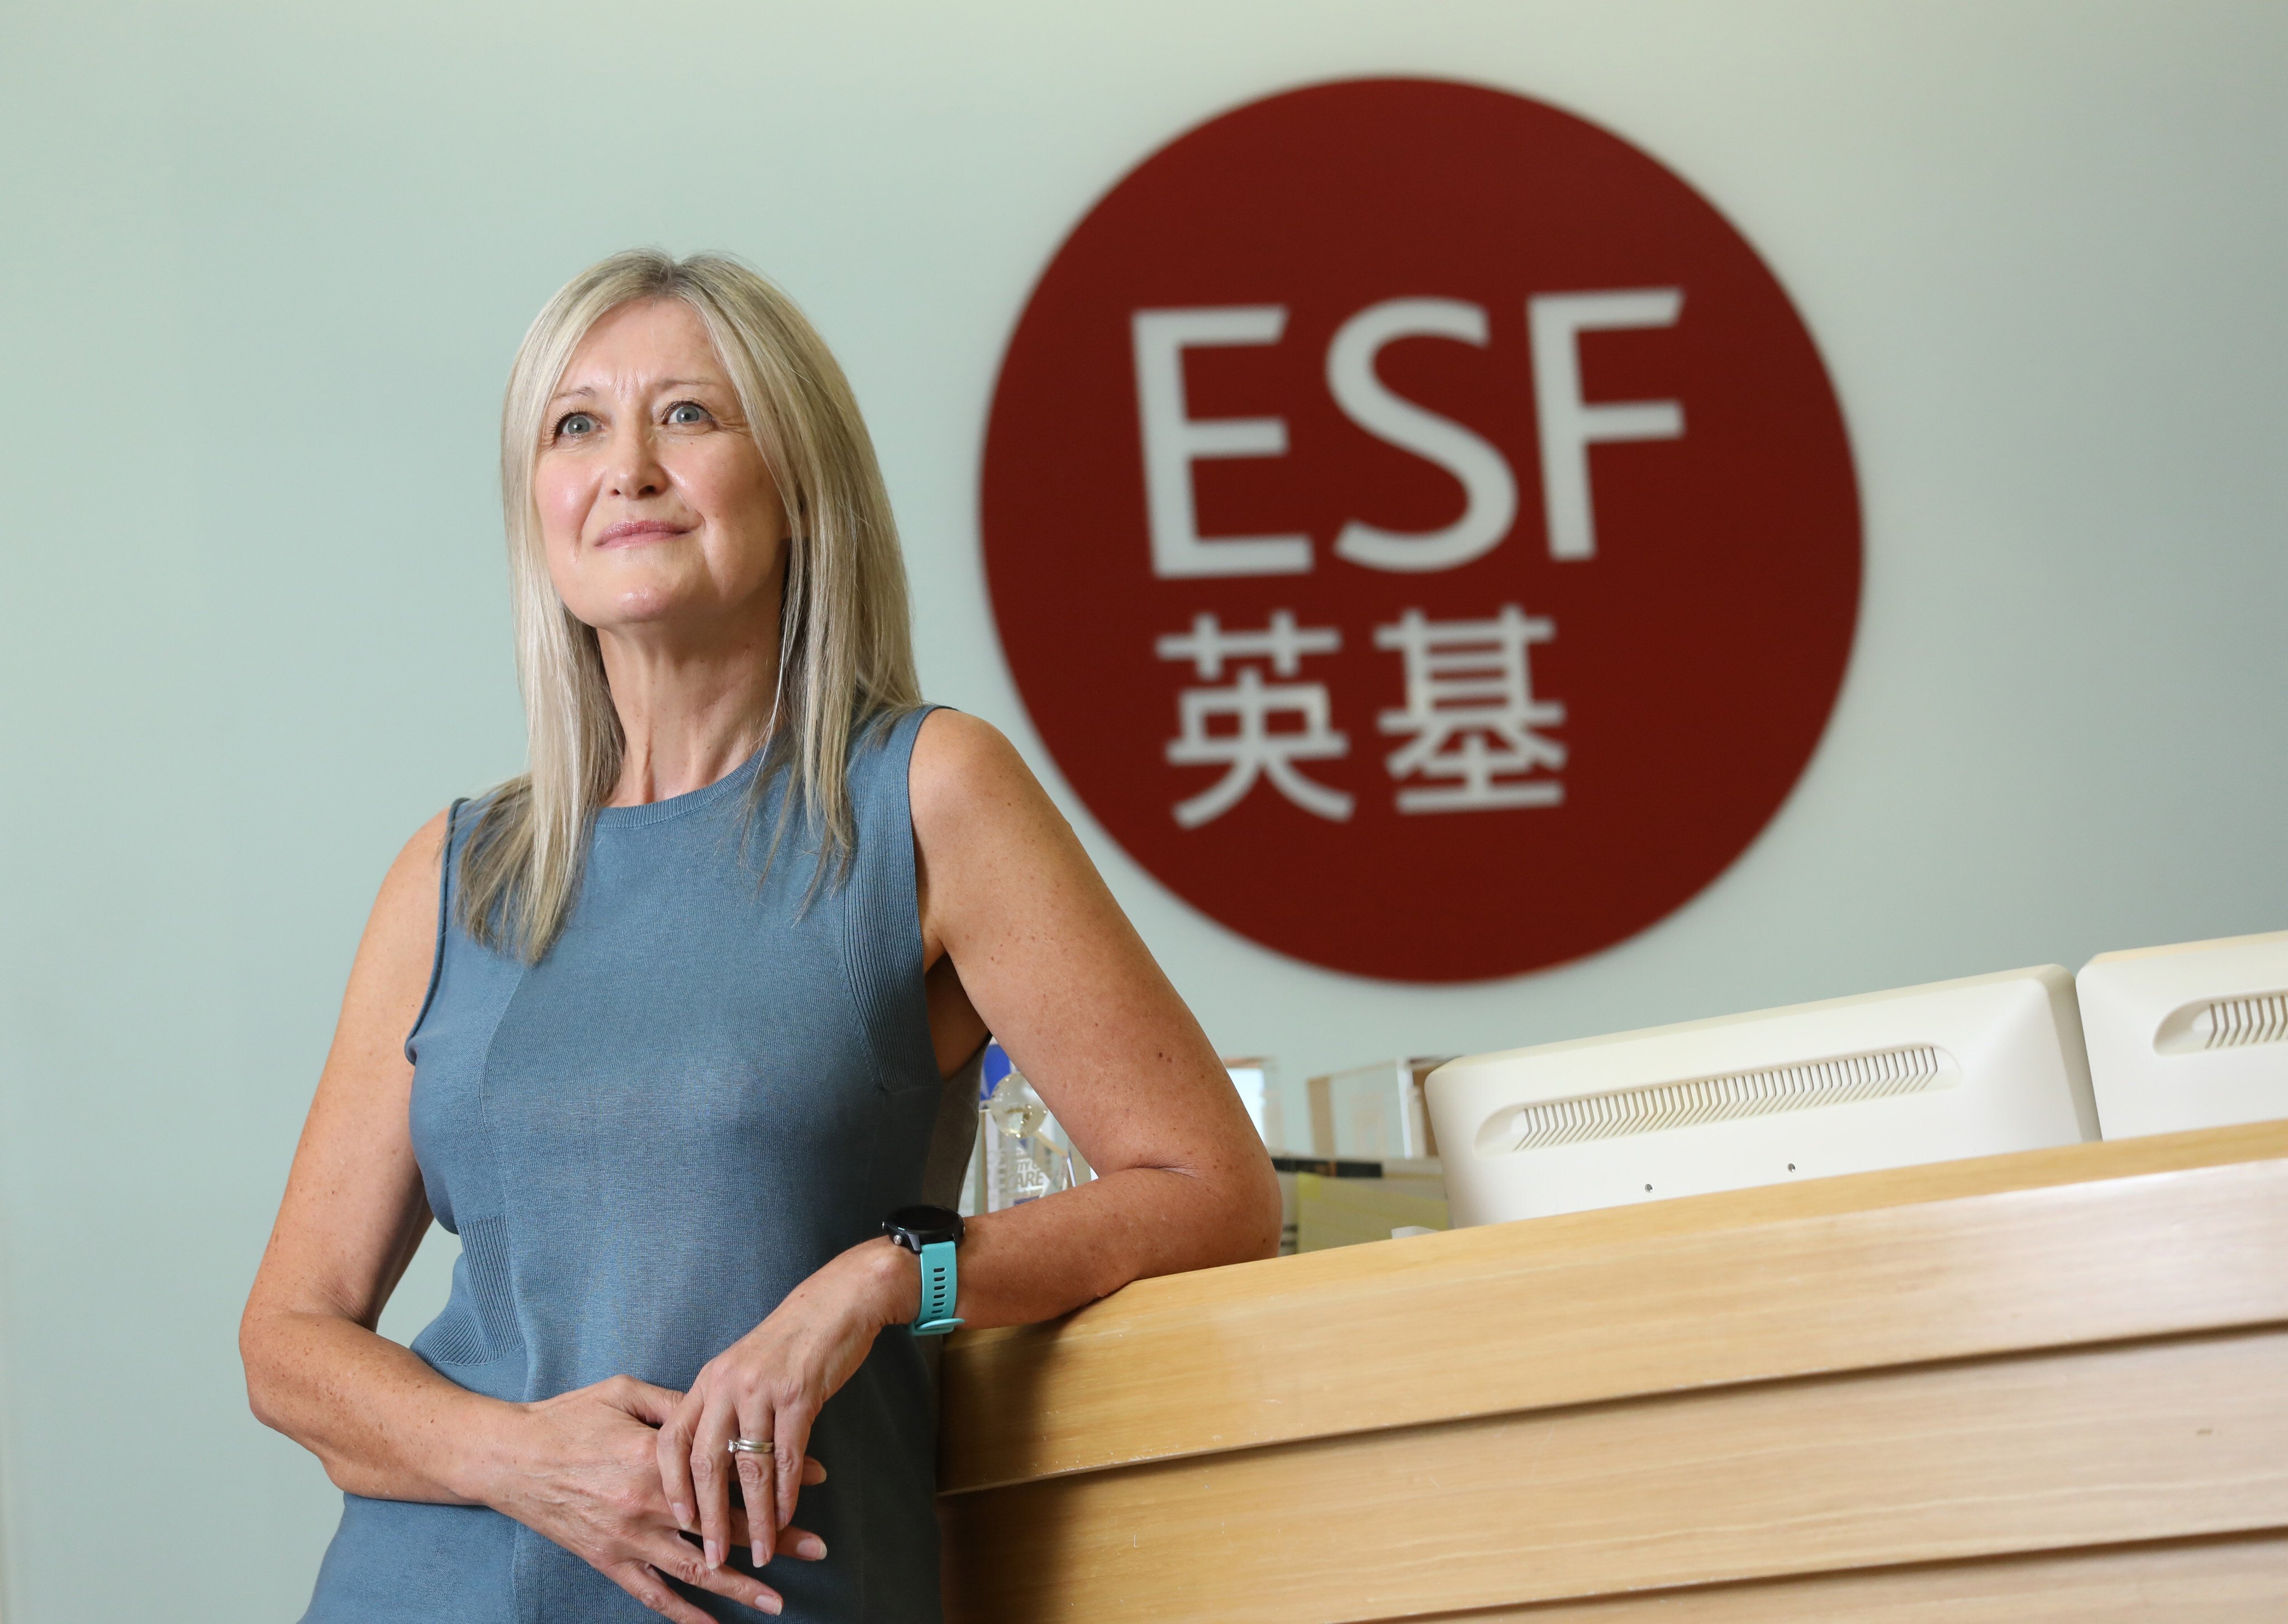 Belinda Greer, chief executive officer of the English Schools Foundation, says extending the summer holidays to eight weeks would allow more time for families to travel and complete quarantine while at the same time ensuring the same number of school days are retained. Photo: May Tse